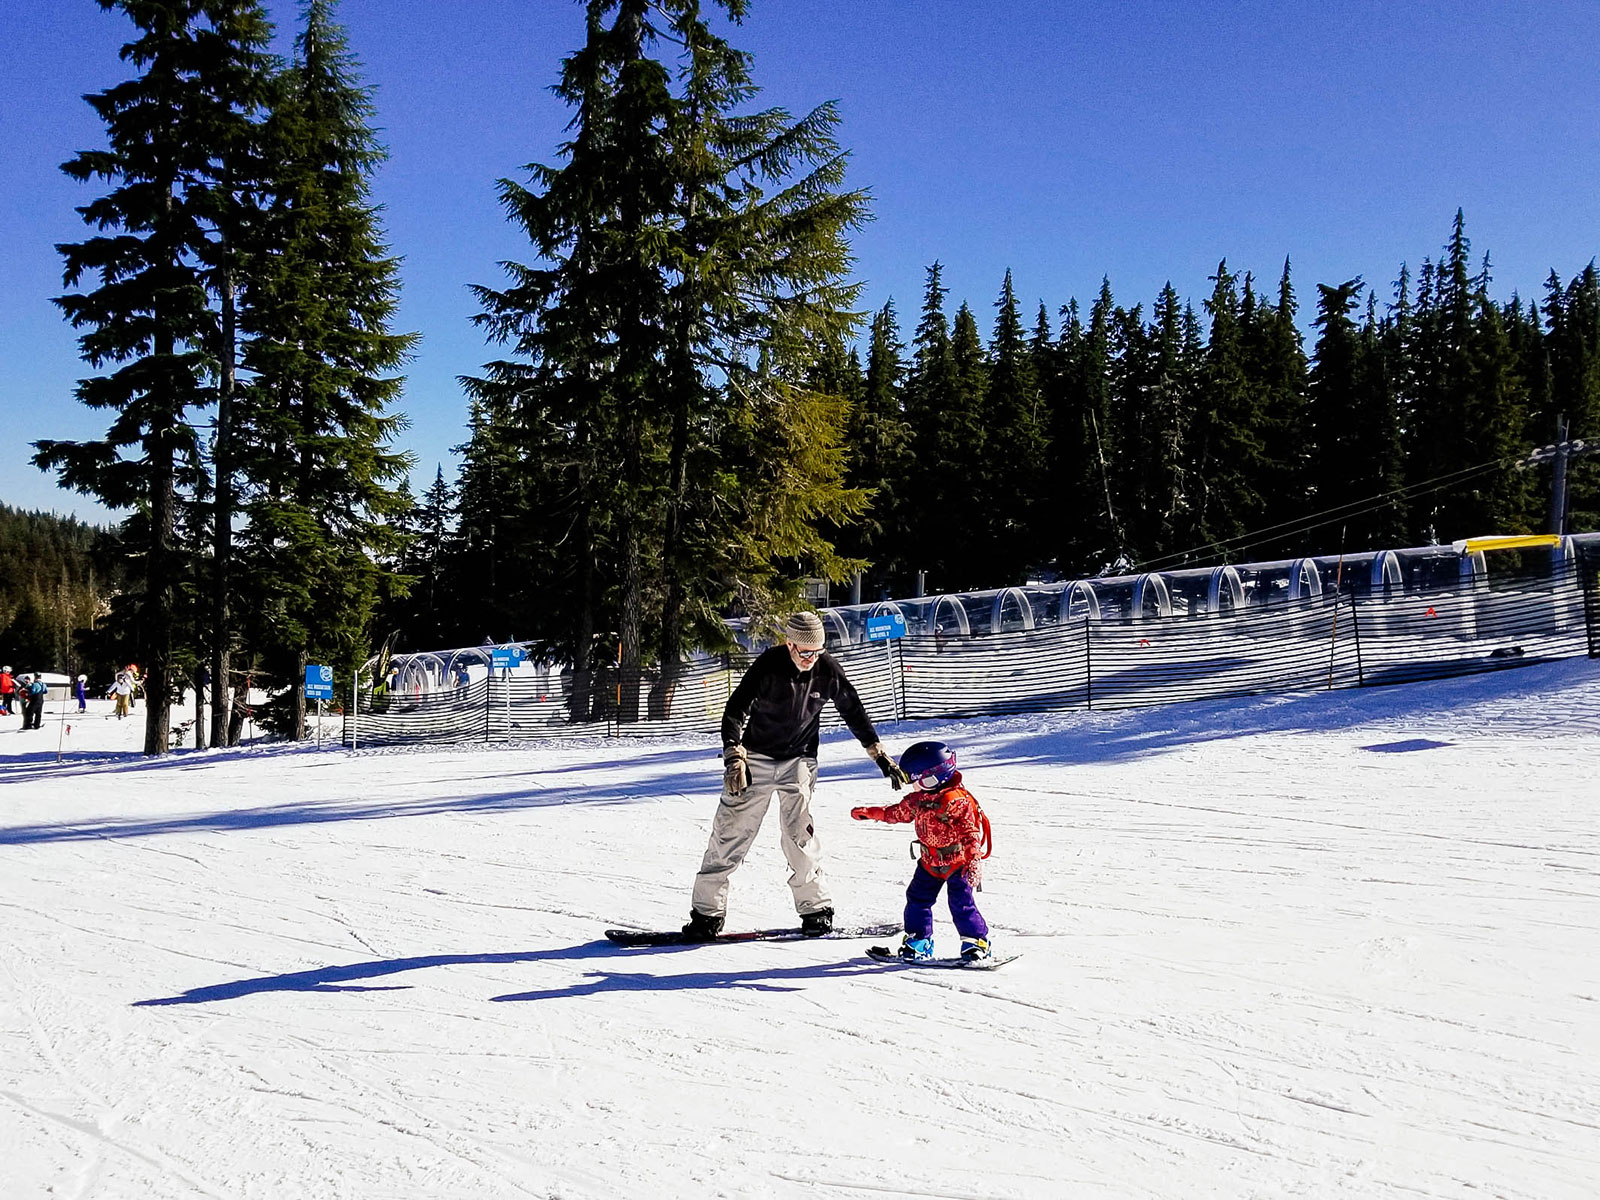 A parent teaching a 3-year-old how to snowboard at a ski resort